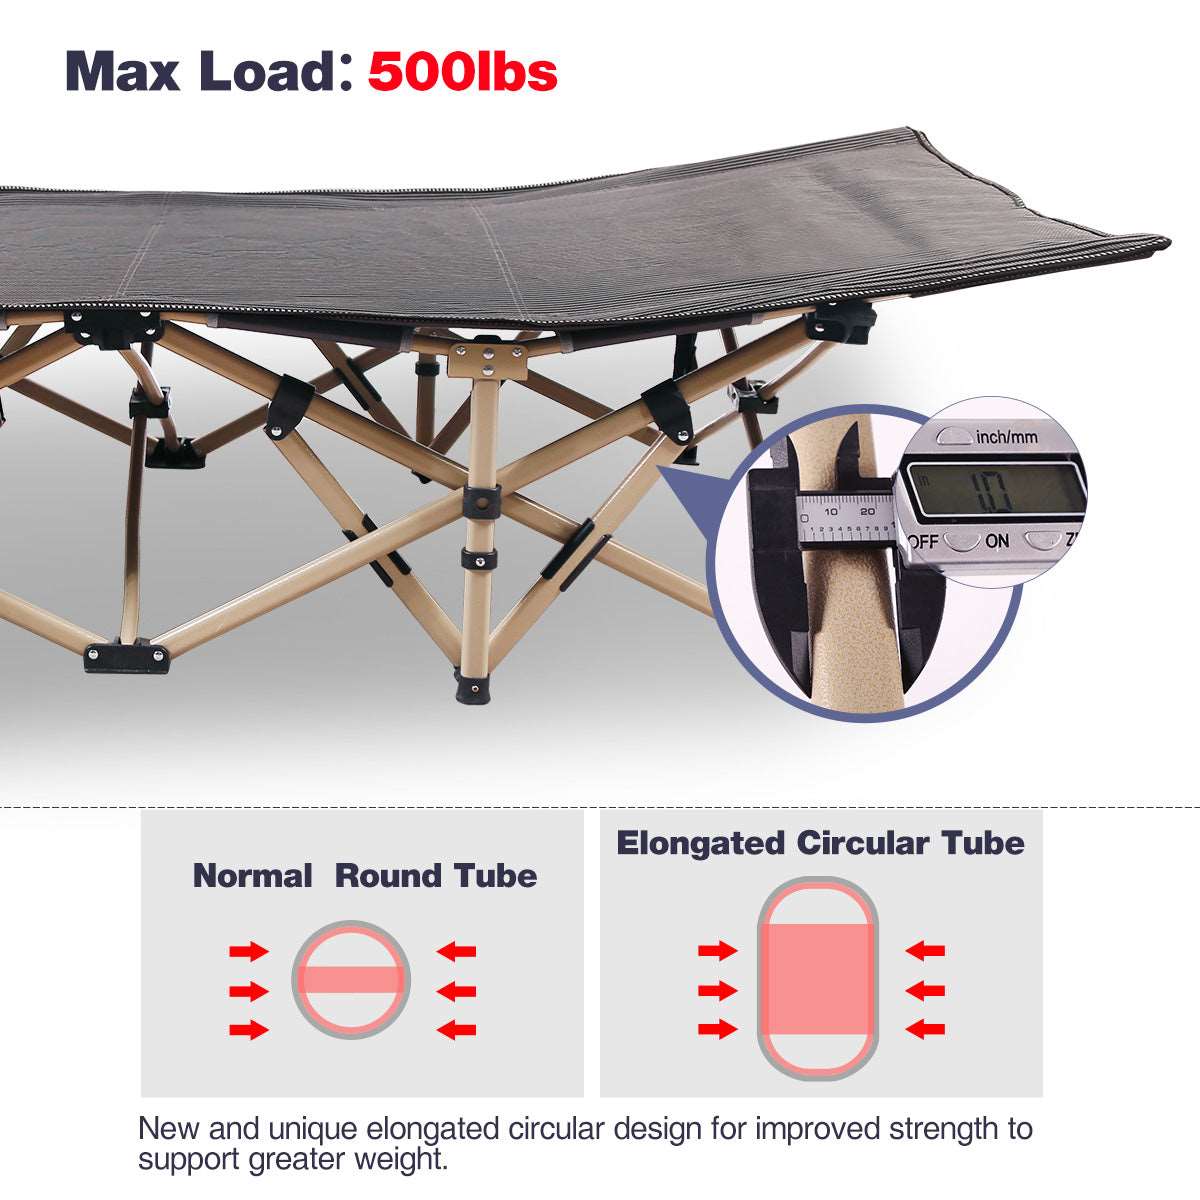 Folding Camping Cot for Adults